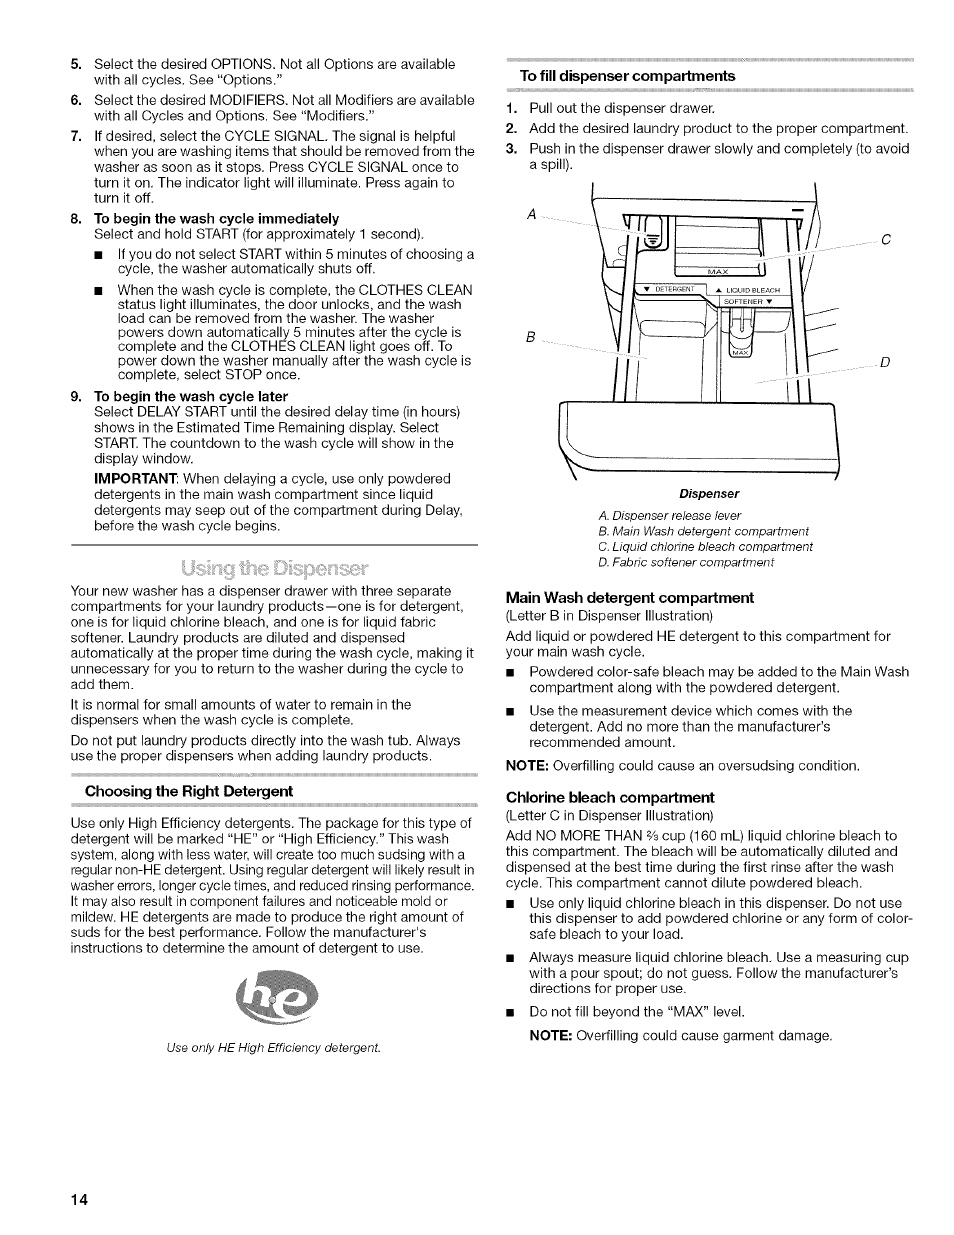 To till dispenser compartments, Choosing the right detergent, Main wash detergent compartment | Chlorine bleach compartment | Kenmore HE2 PLUS User Manual | Page 14 / 80